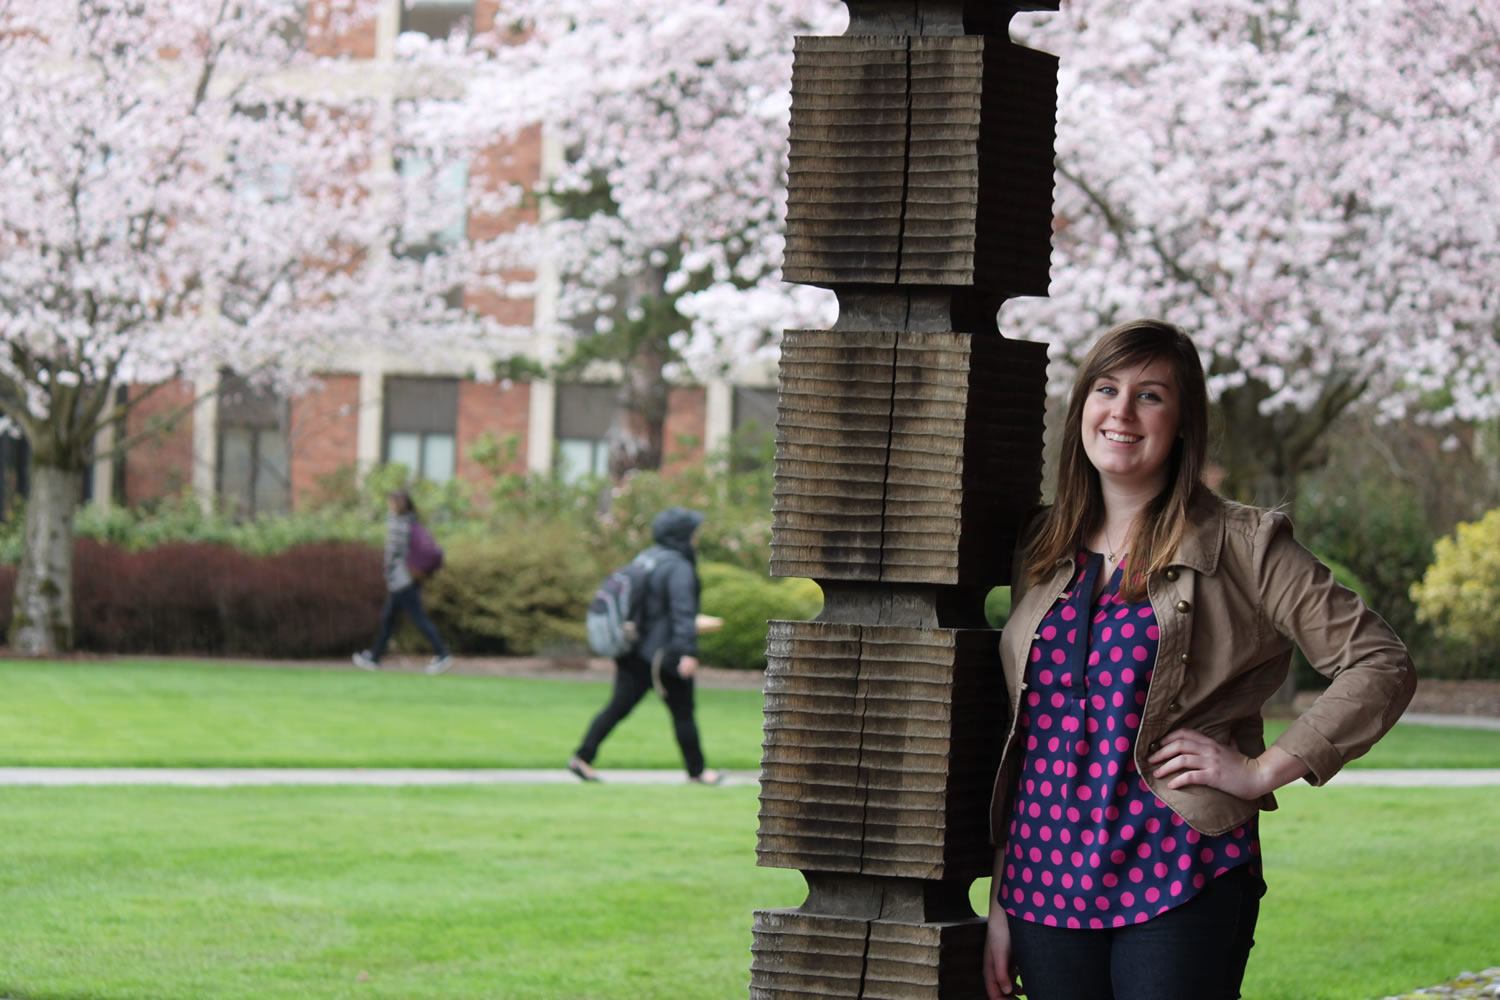 Kelly Slauson, 20, was diagnosed with rheumatoid arthritis when she was 18 months old. The past 18 years have been filled with ups and downs when it comes to issues surrounding her health, but with the support of her family the University of Portland junior has taken it all in stride. She continues to reach out to other RA sufferers through the Arthritis Foundation, and is studying to become a registered nurse. &quot;I have had so many people help me along my journey,&quot; she said.